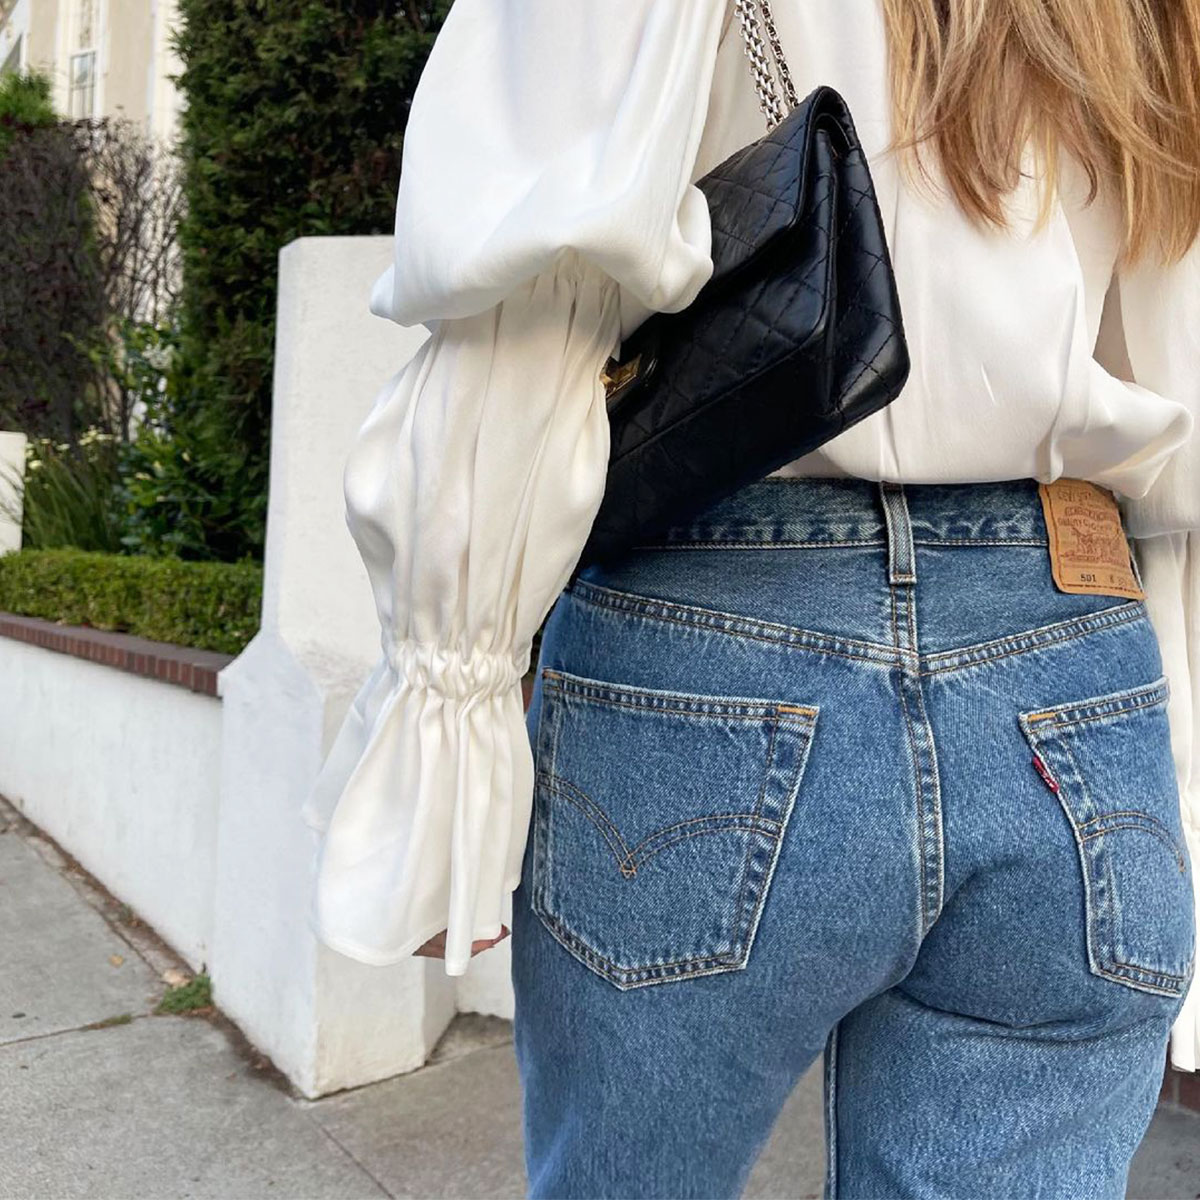 Schaken Aanleg Lodge The 10 Best Places to Buy Jeans Online, According to Us | Who What Wear